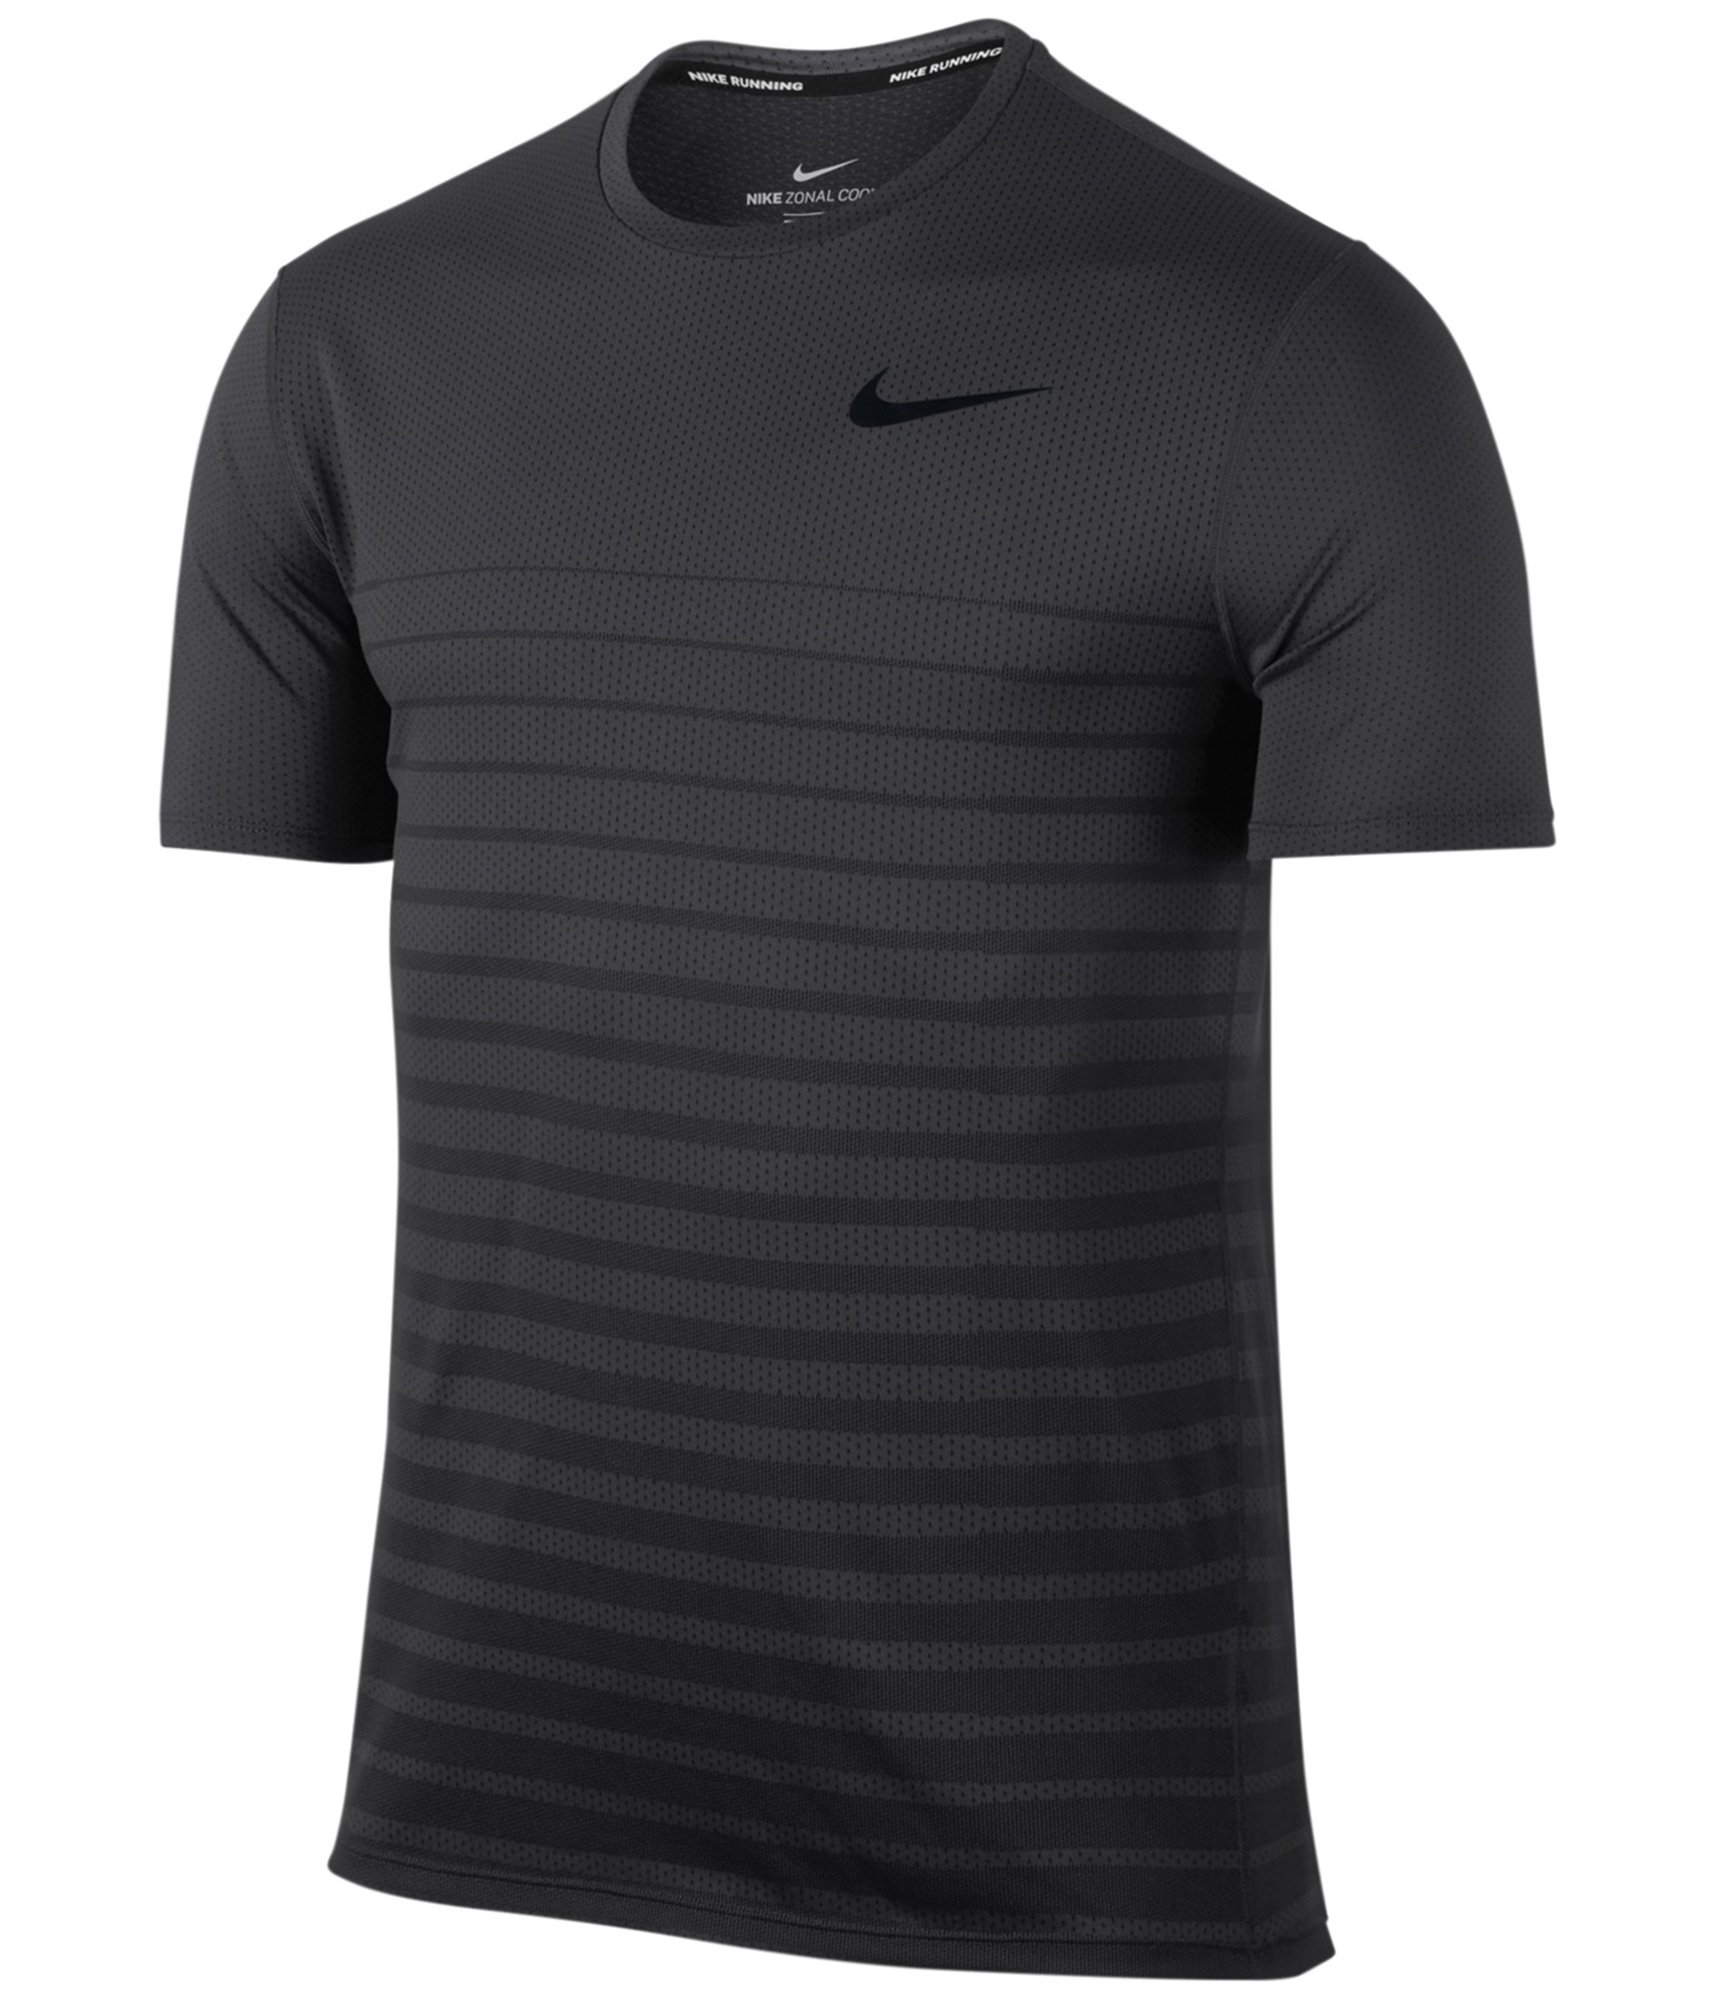 divorcio estéreo Fracaso Buy a Mens Nike Zonal Cooling Relay Basic T-Shirt Online | TagsWeekly.com